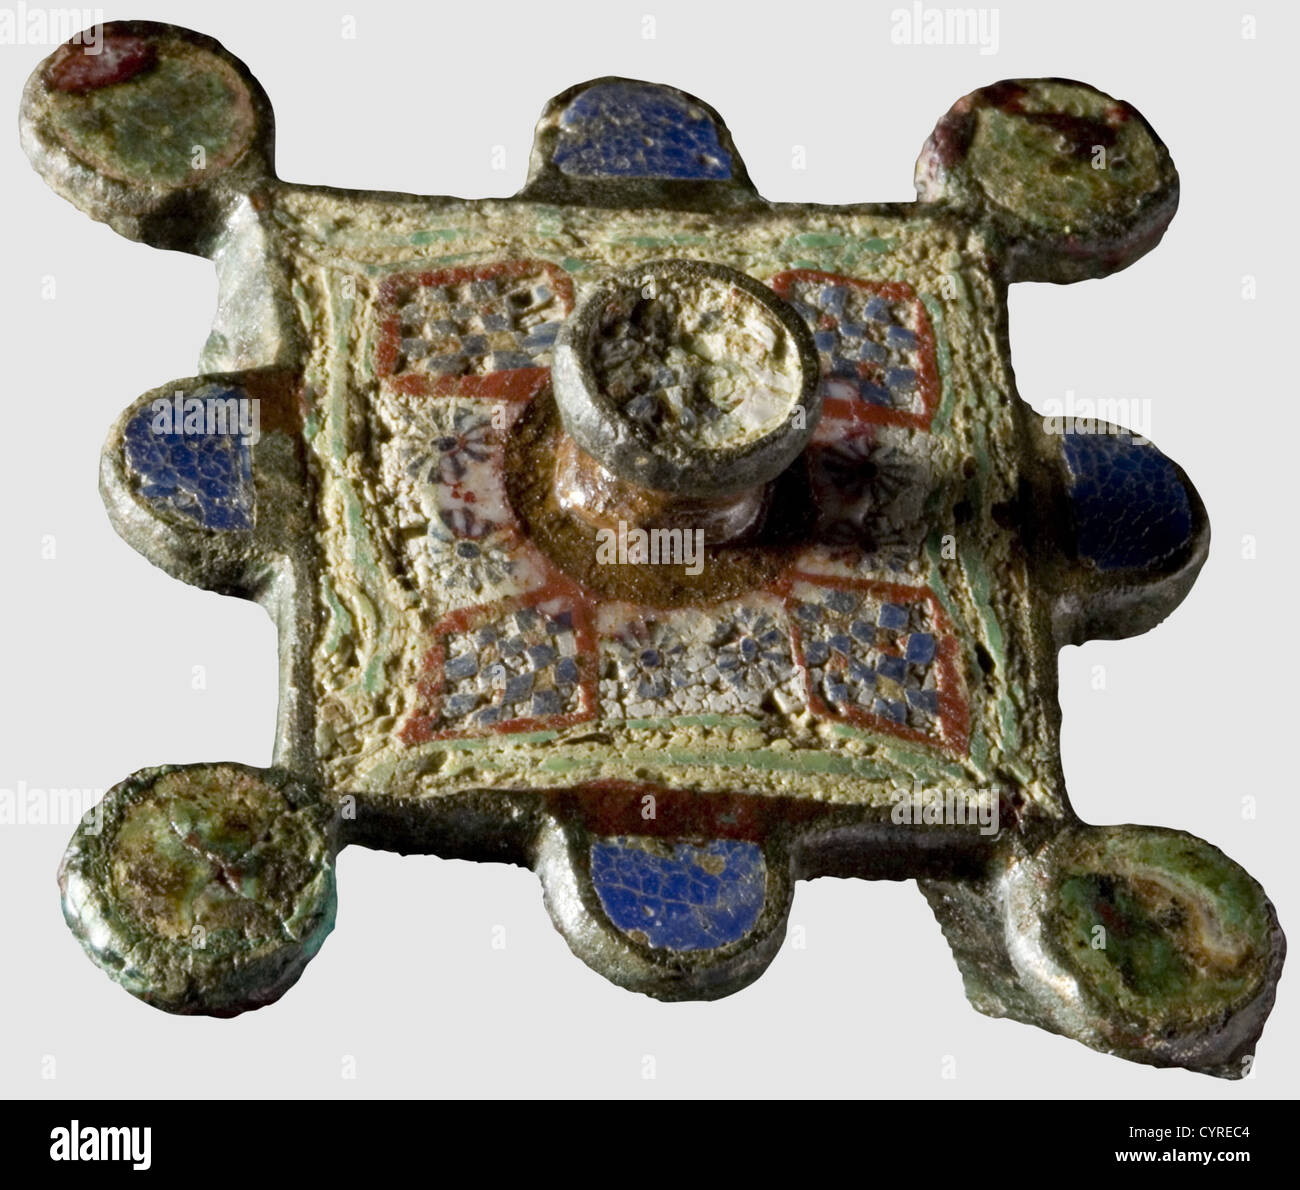 A large Roman millefiori fibula, 2nd/3rd century A.D. Bronze with greenish patina. Square plate mit surrounding circular ornaments. The obverse with well preserved enamelled decor, the centre inlaid with millefiori glass. Remains of the needle socket on the back. Diameter 4.9 cm, historic, historical, ancient world, ancient world, ancient times, object, objects, stills, clipping, cut out, cut-out, cut-outs, Additional-Rights-Clearences-Not Available Stock Photo